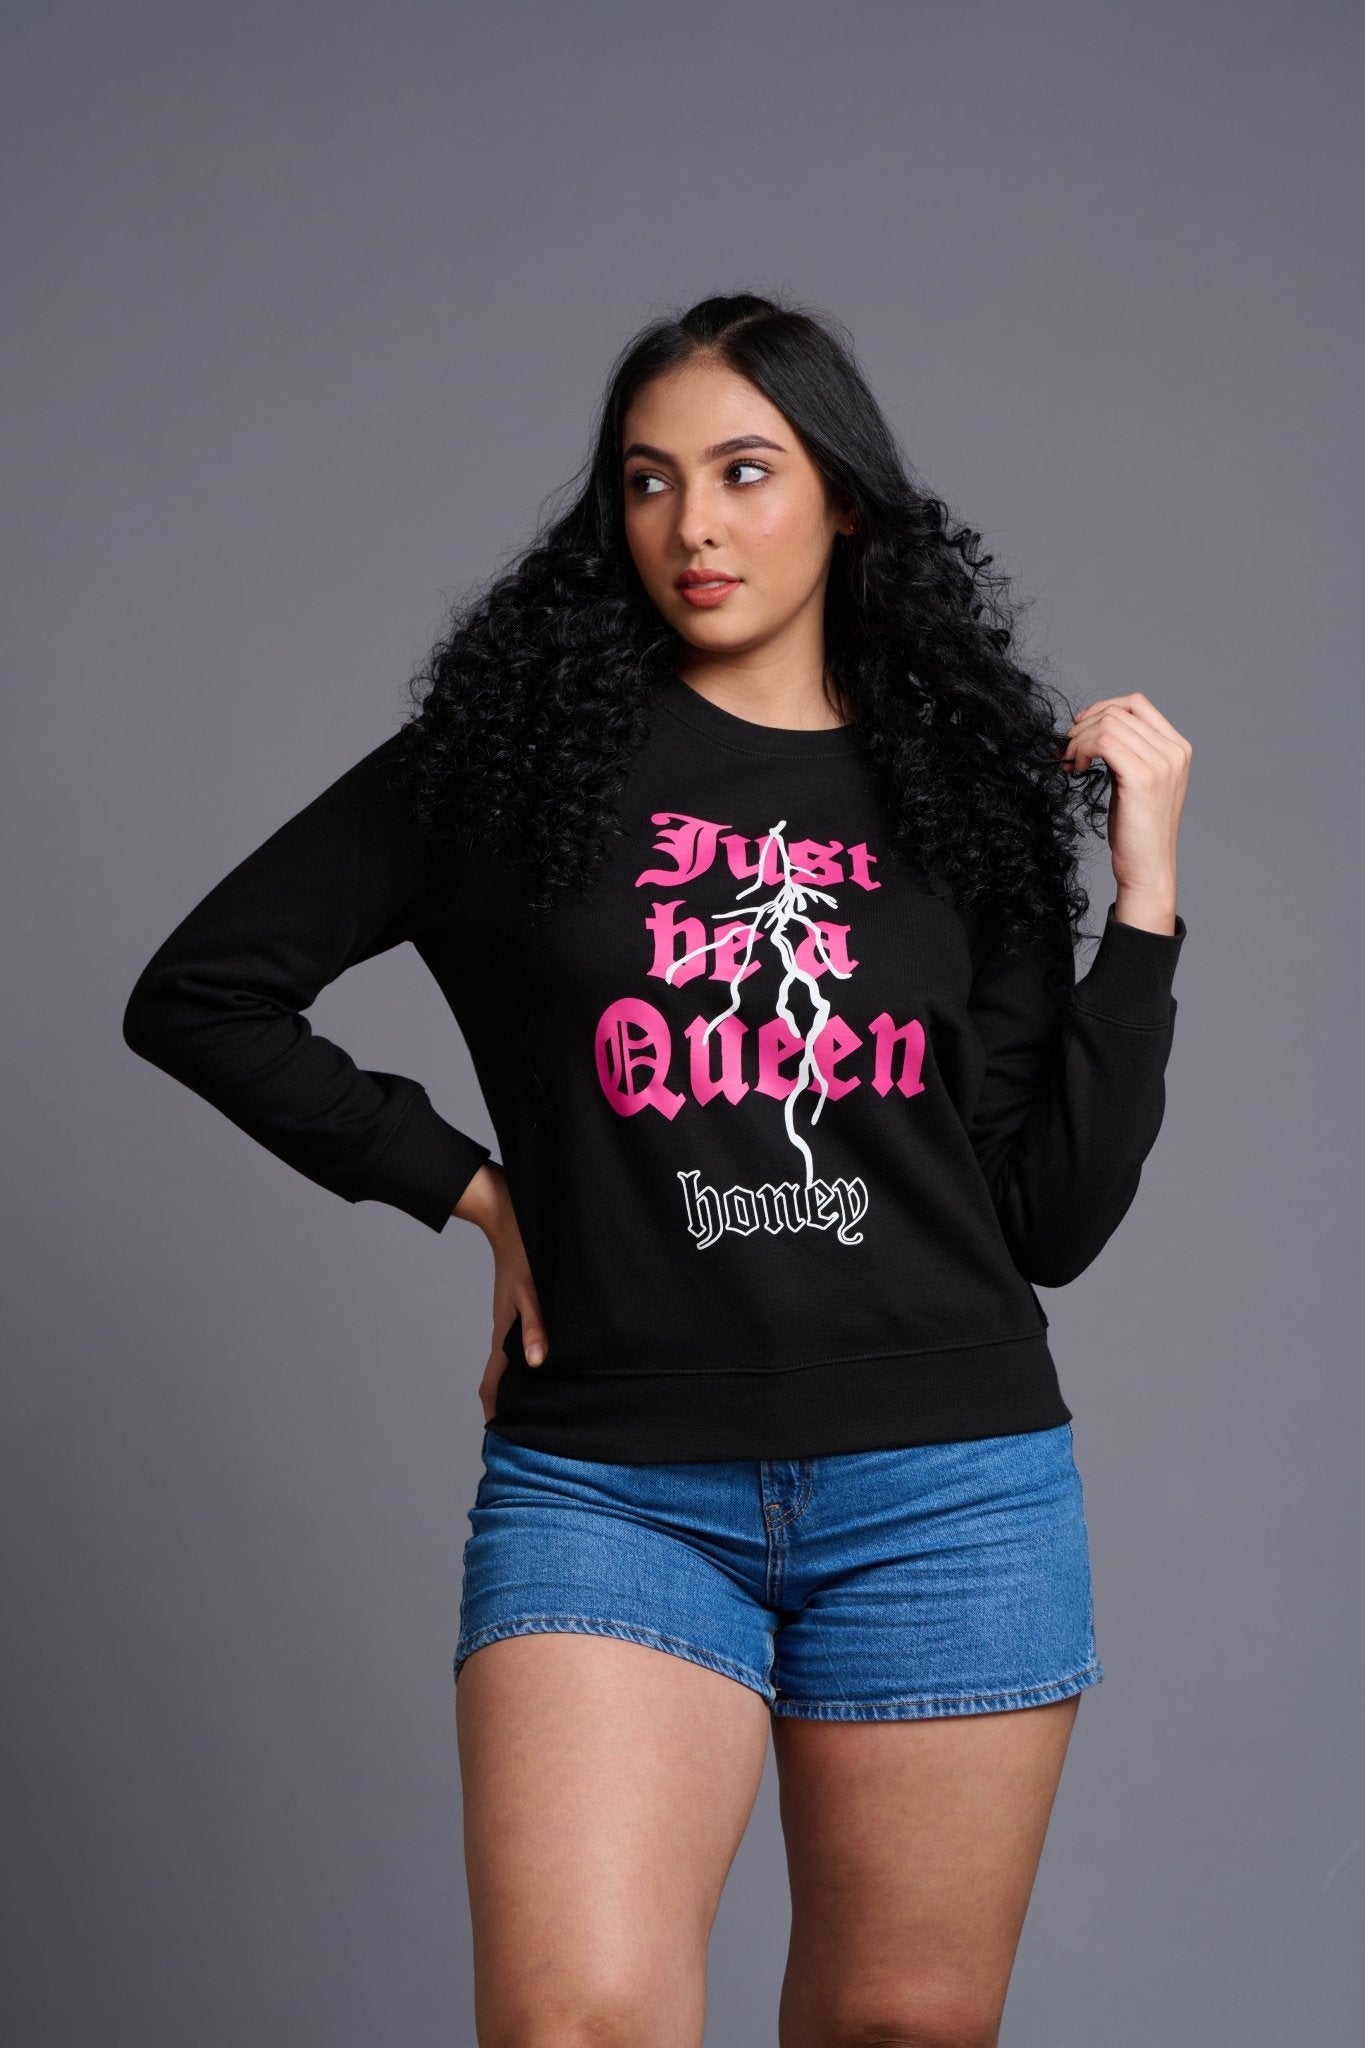 Just Be a Queen Printed Sweatshirt for Women - Go Devil